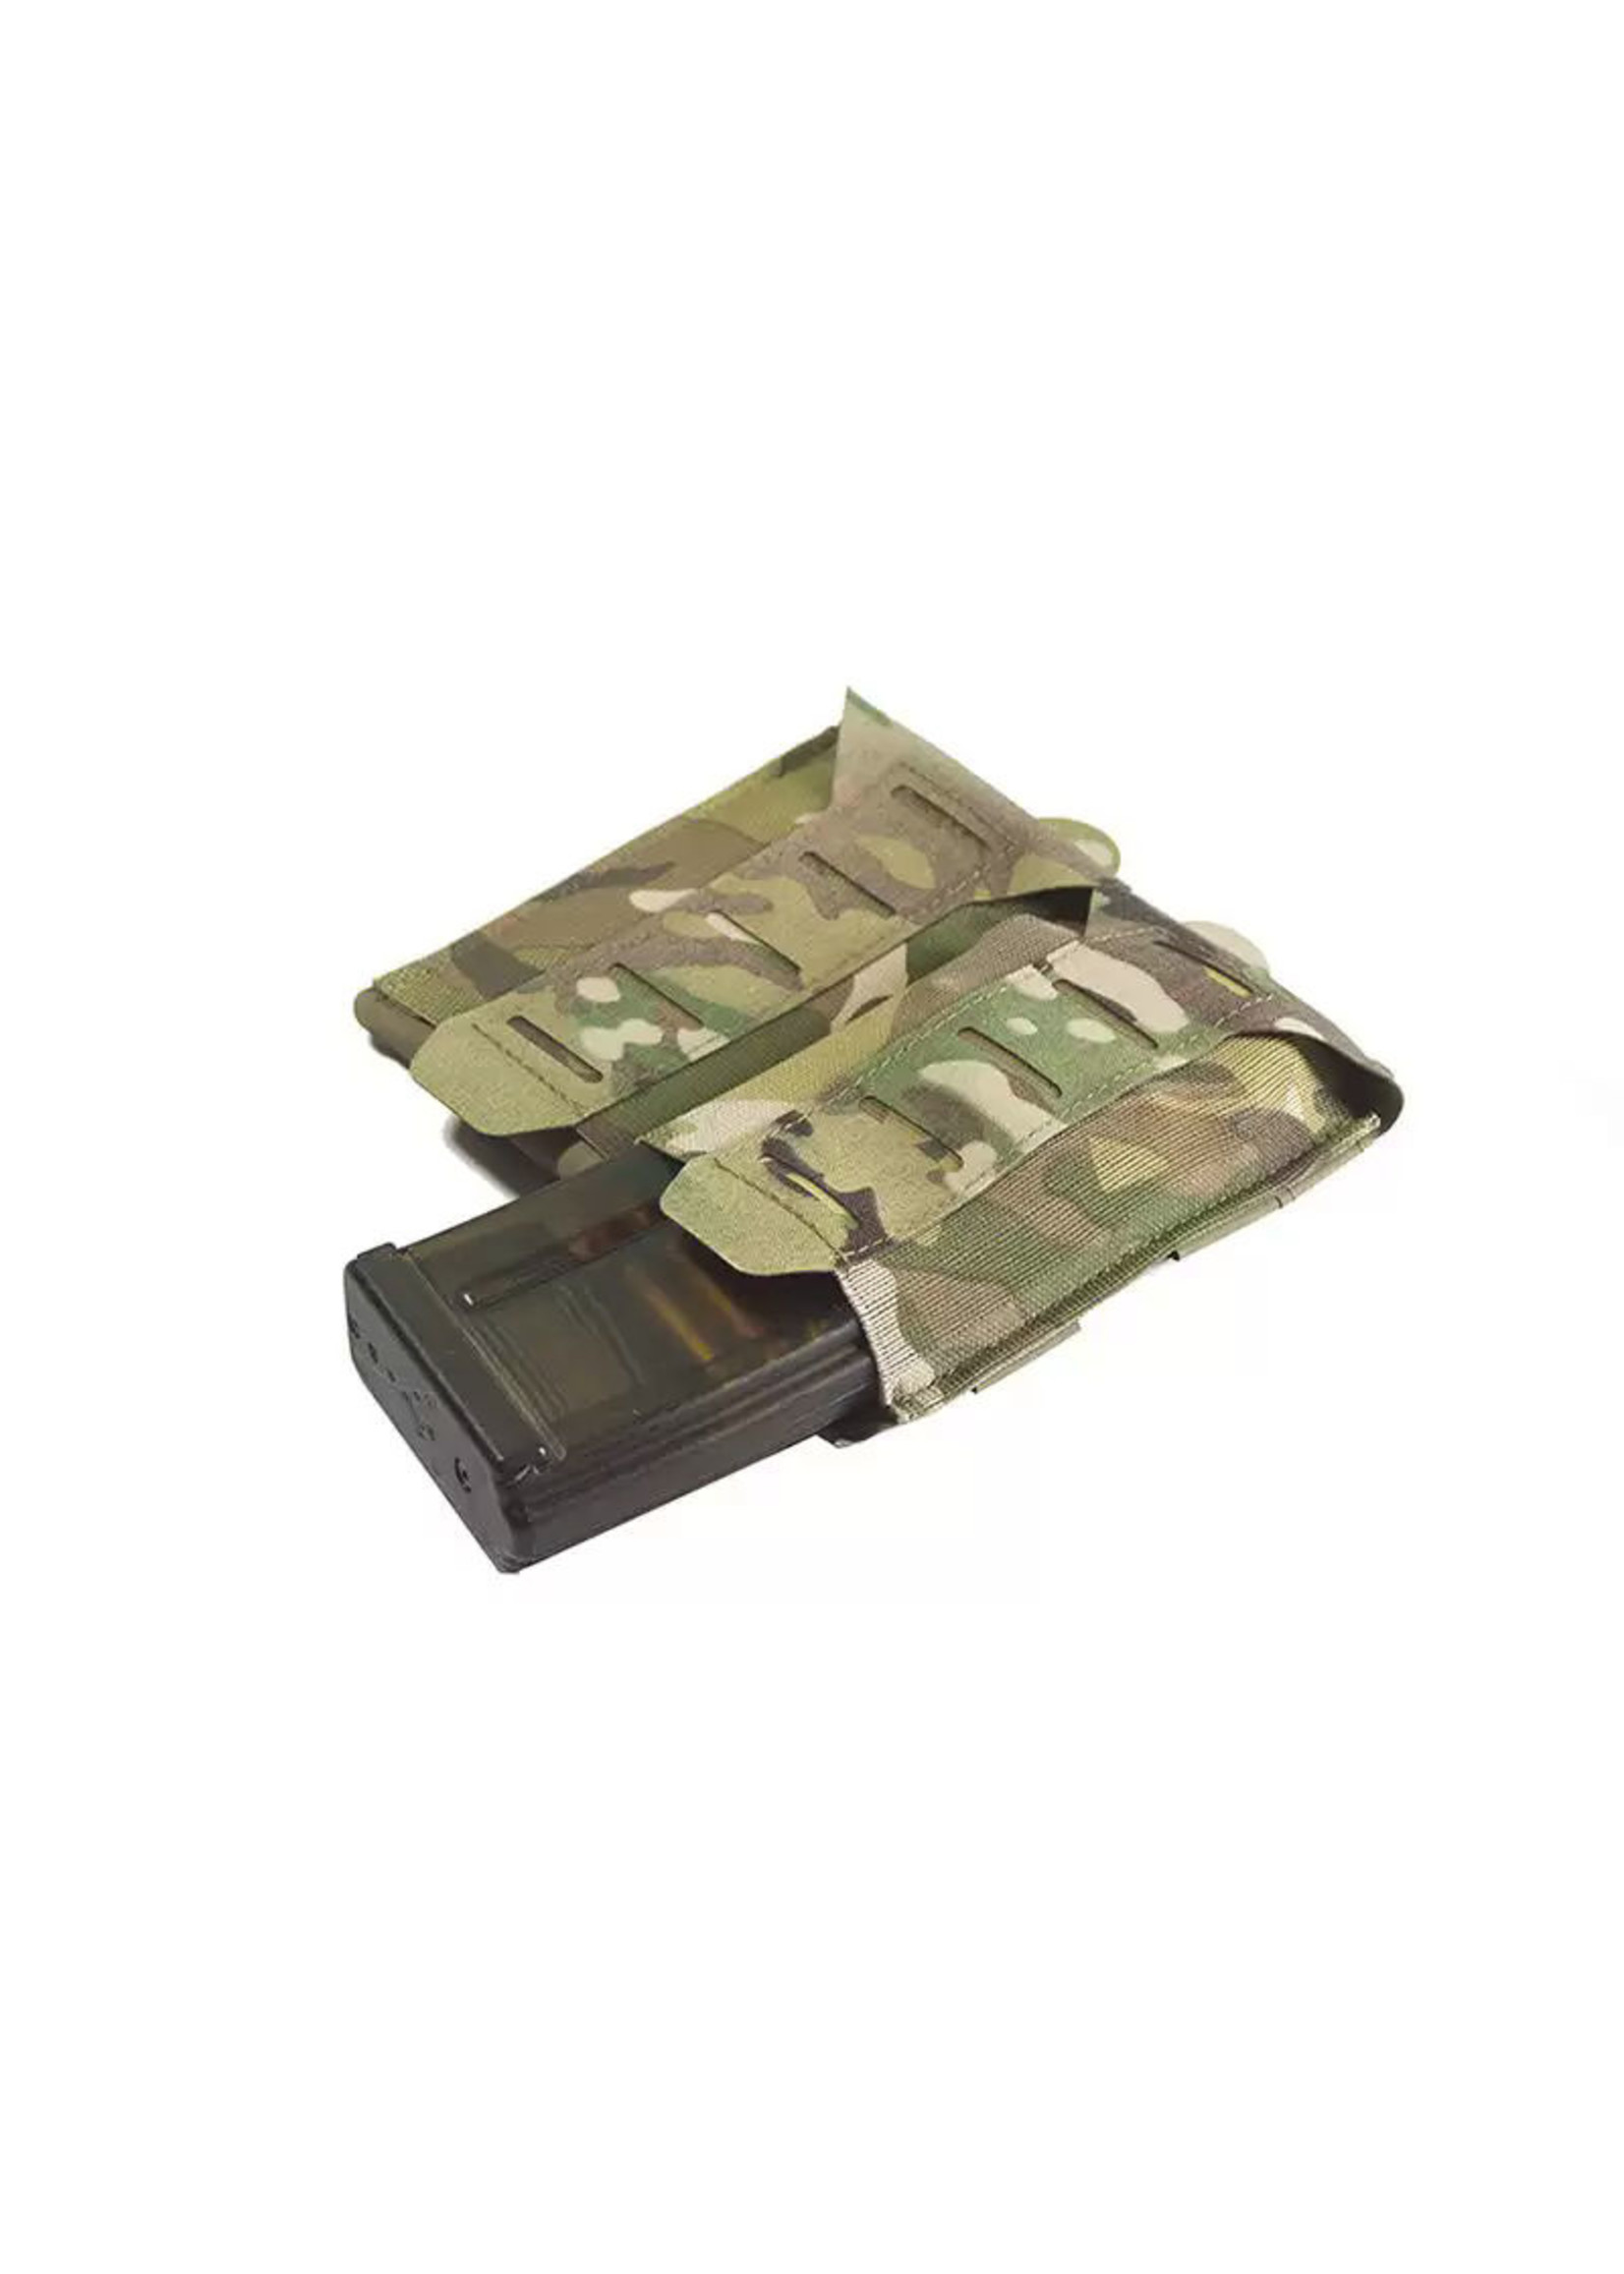 BLUE FORCE GEAR STACKABLE TEN-SPEED  DOUBLE M4 MAG POUCH